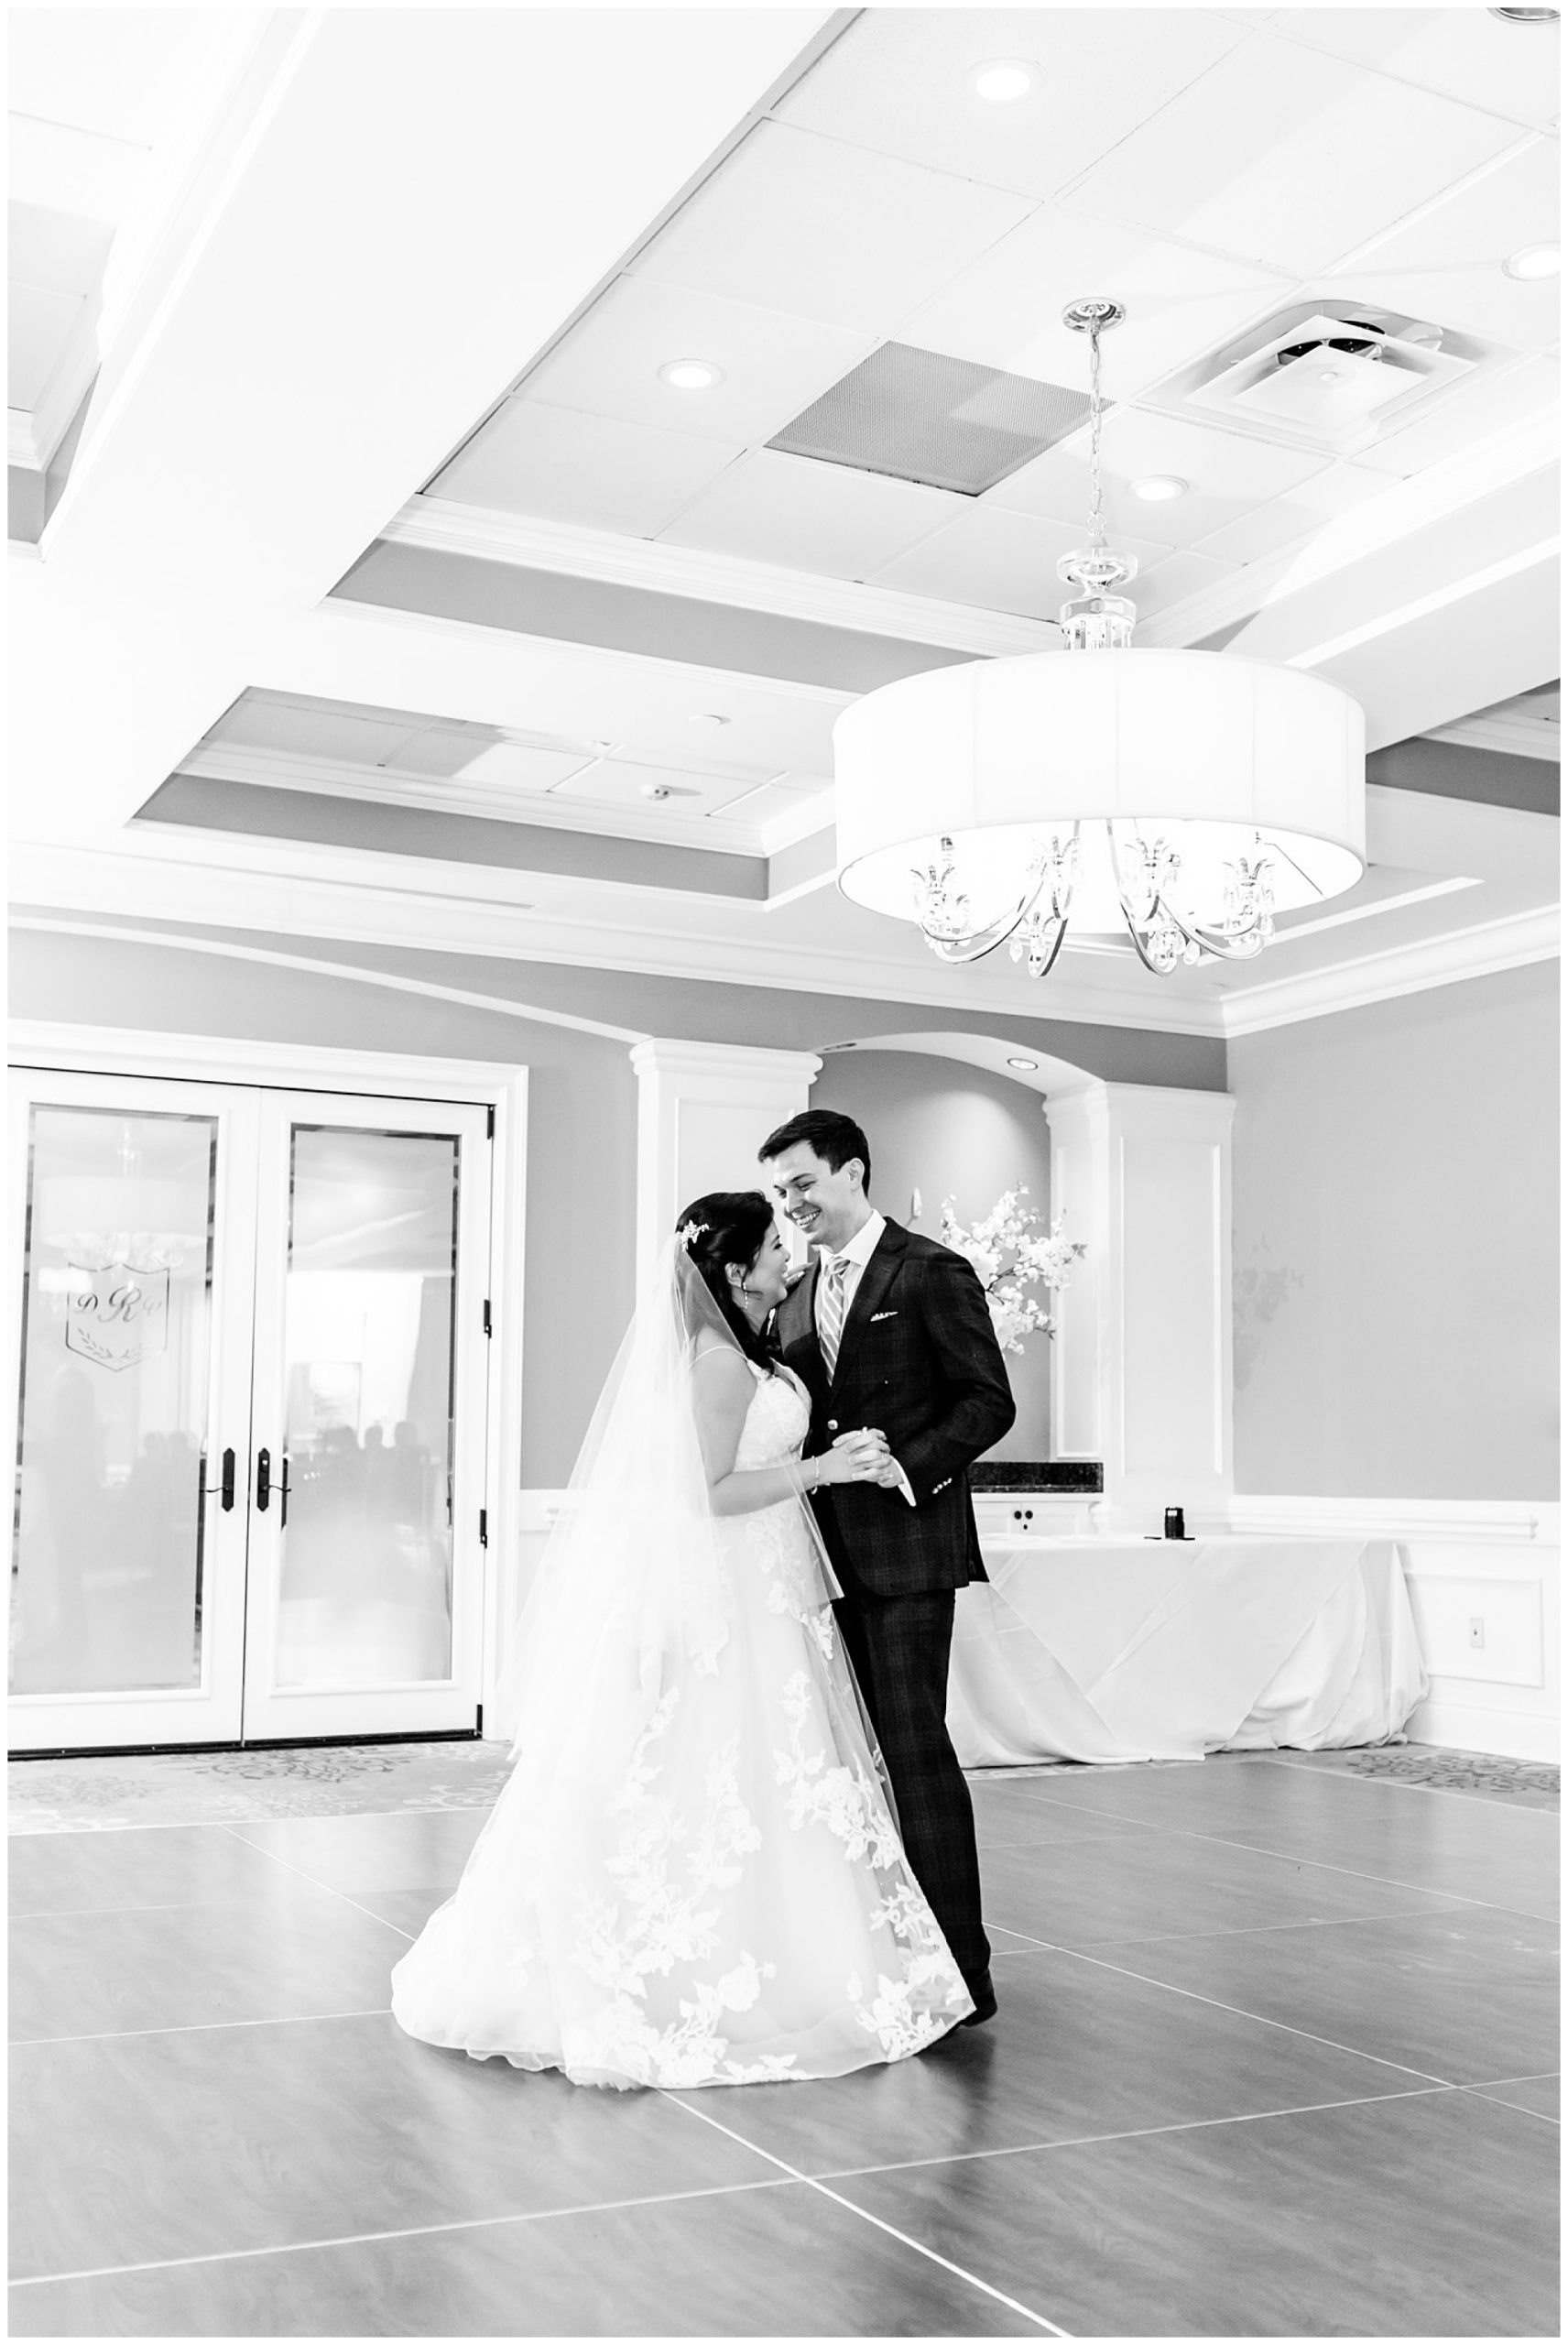 Regency at Dominion Valley wedding, Virginia country club wedding, Haymarket Virginia wedding, northern Virginia wedding, winter wedding, winter wedding aesthetic, DC micro wedding, northern Virginia wedding venues, classic winter wedding, Rachel E.H. Photography, wedding dress from Global Bridal Gallery by Casablanca, bride and groom doing first dance